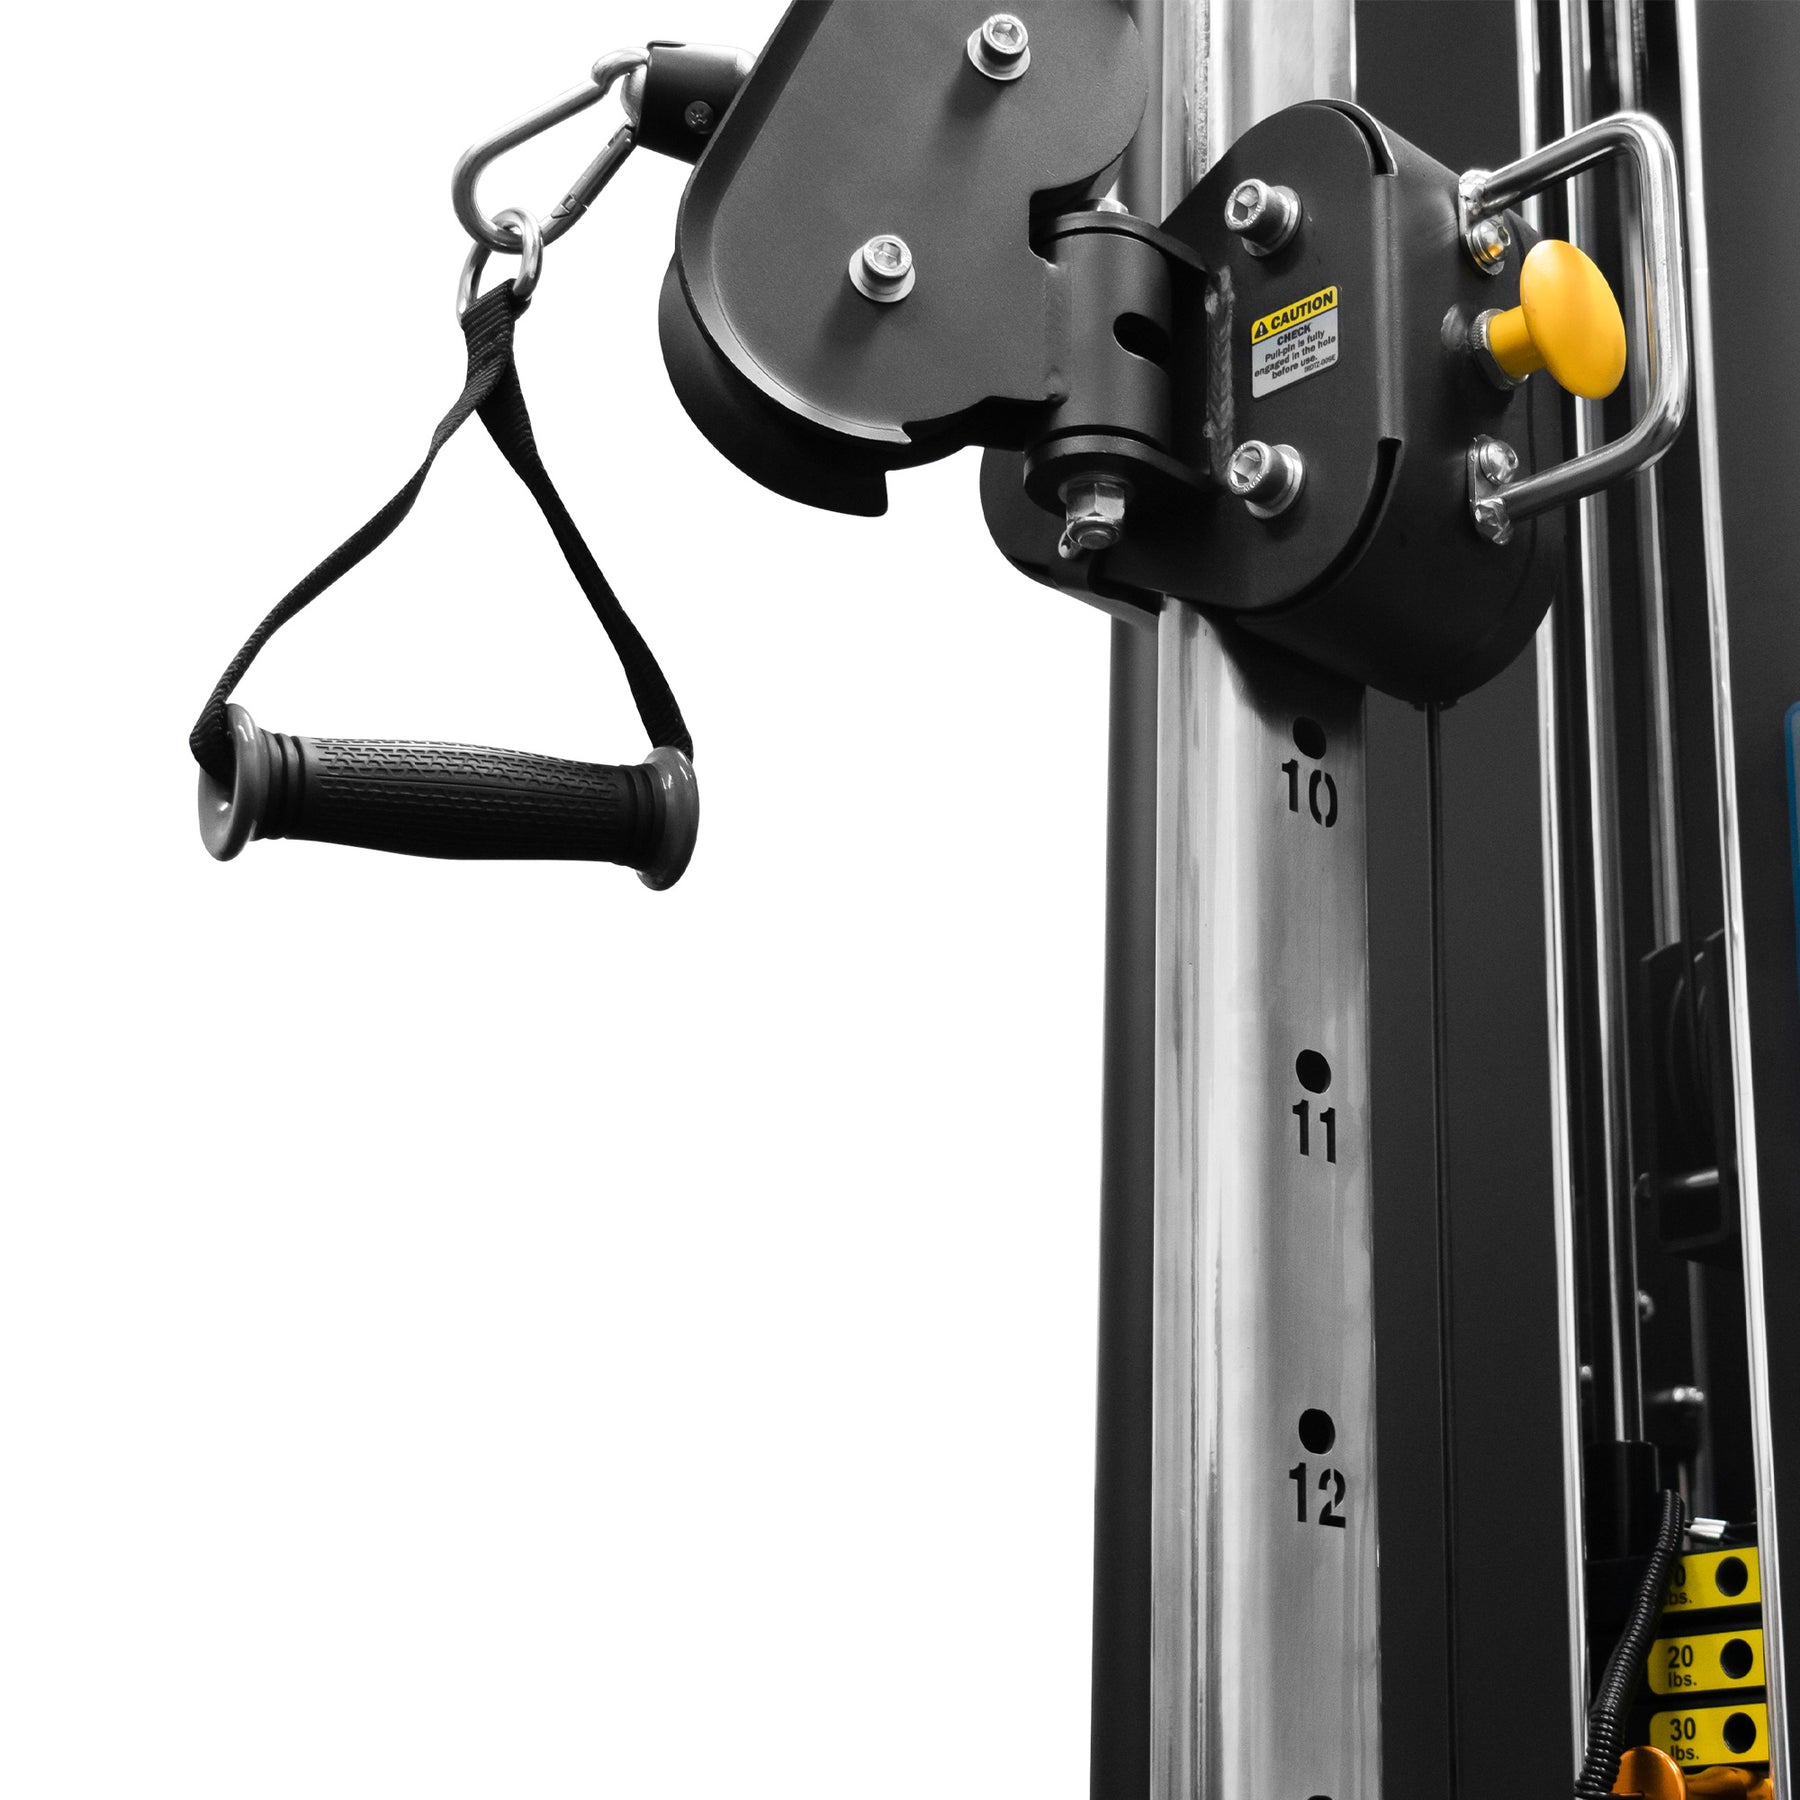 single pulley station - Reeplex 4 Station Commercial Multi-Gym with 150kg Weight Stacks